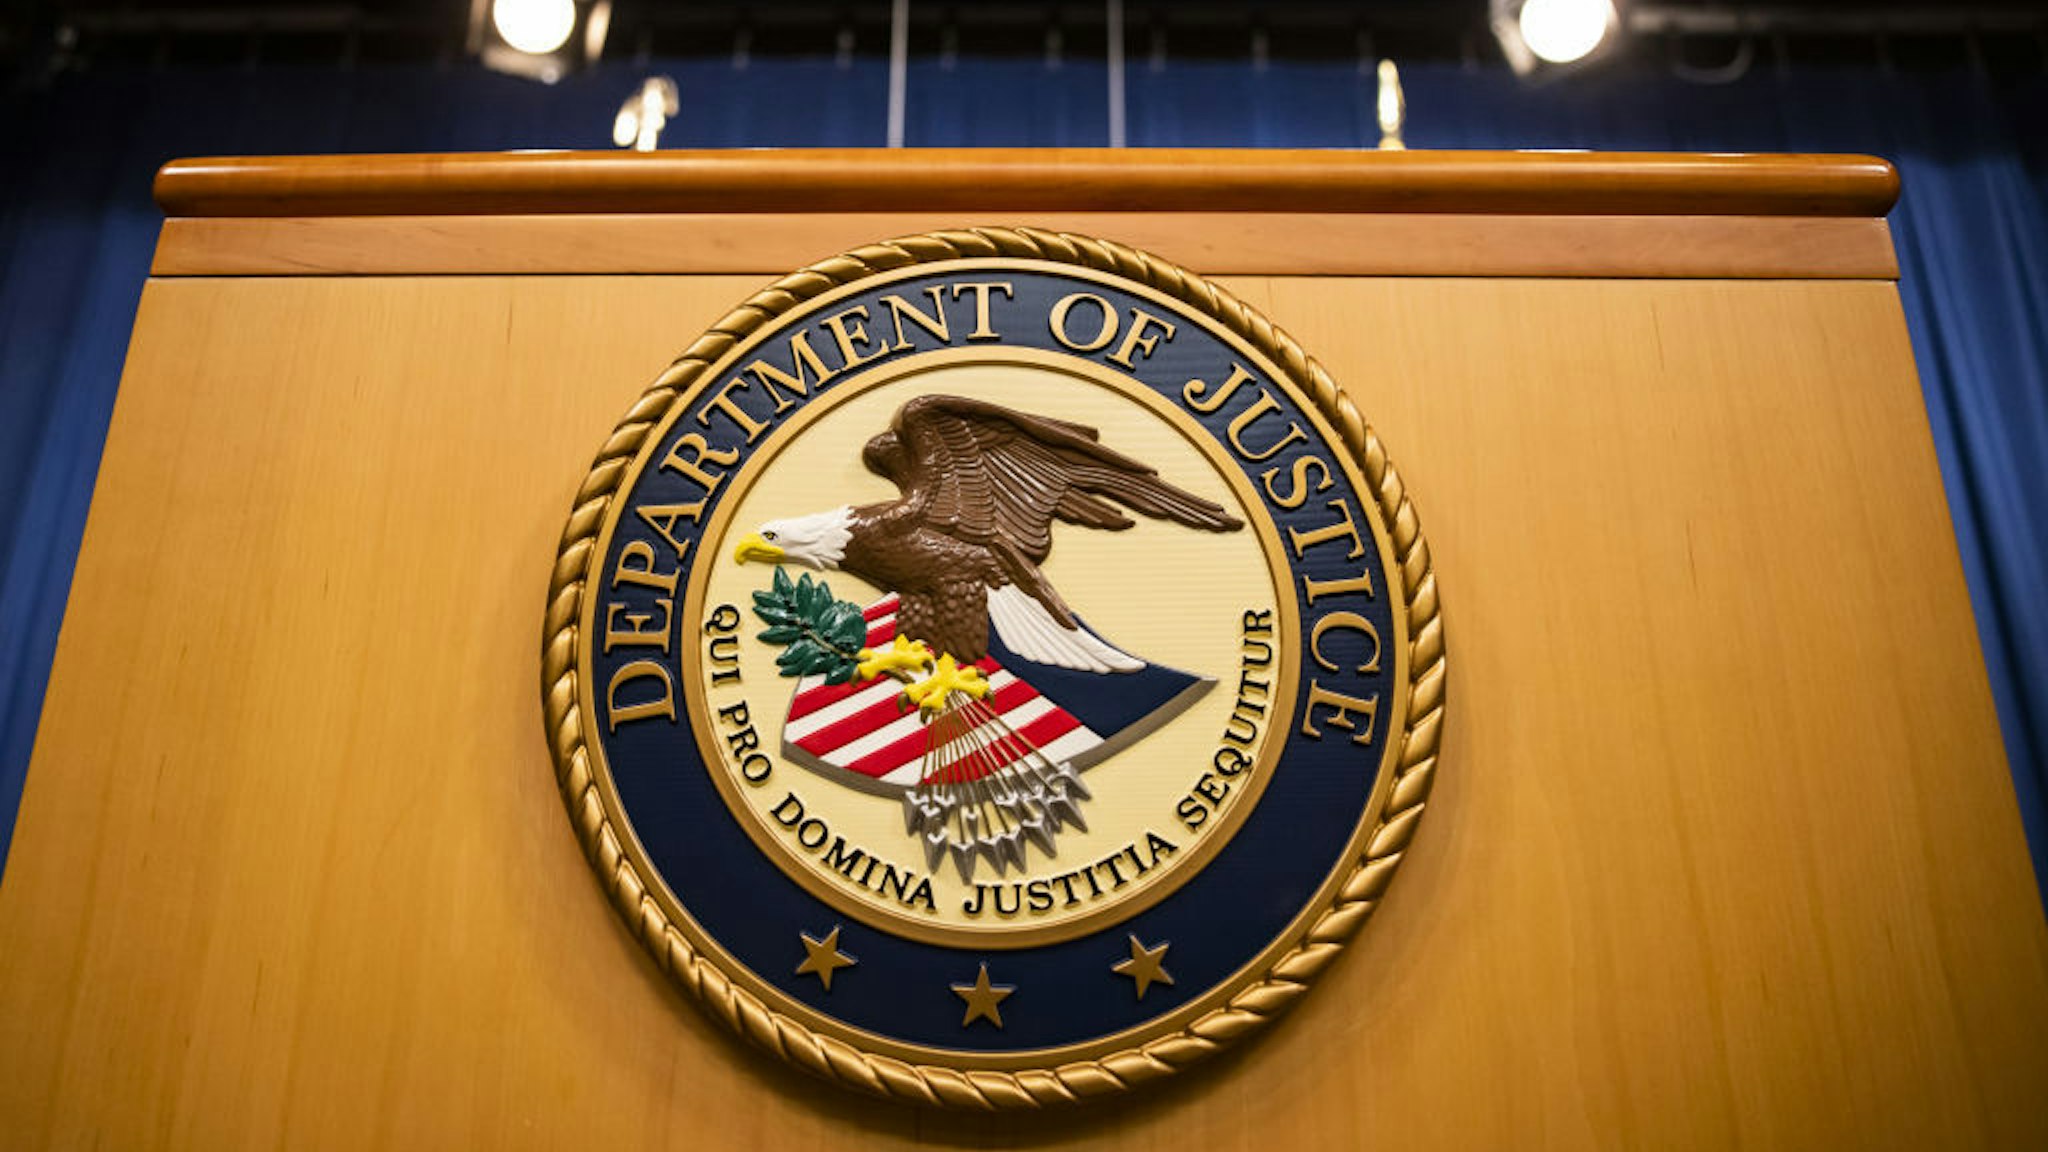 The U.S. Department of Justice seal on a podium in Washington, D.C., U.S., on Thursday, Aug. 5, 2021. The Justice Department has opened an investigation into the City of Phoenix and the Phoenix Police Department looking into types of use of force by Phoenix police department officers. Photographer: Samuel Corum/Bloomberg